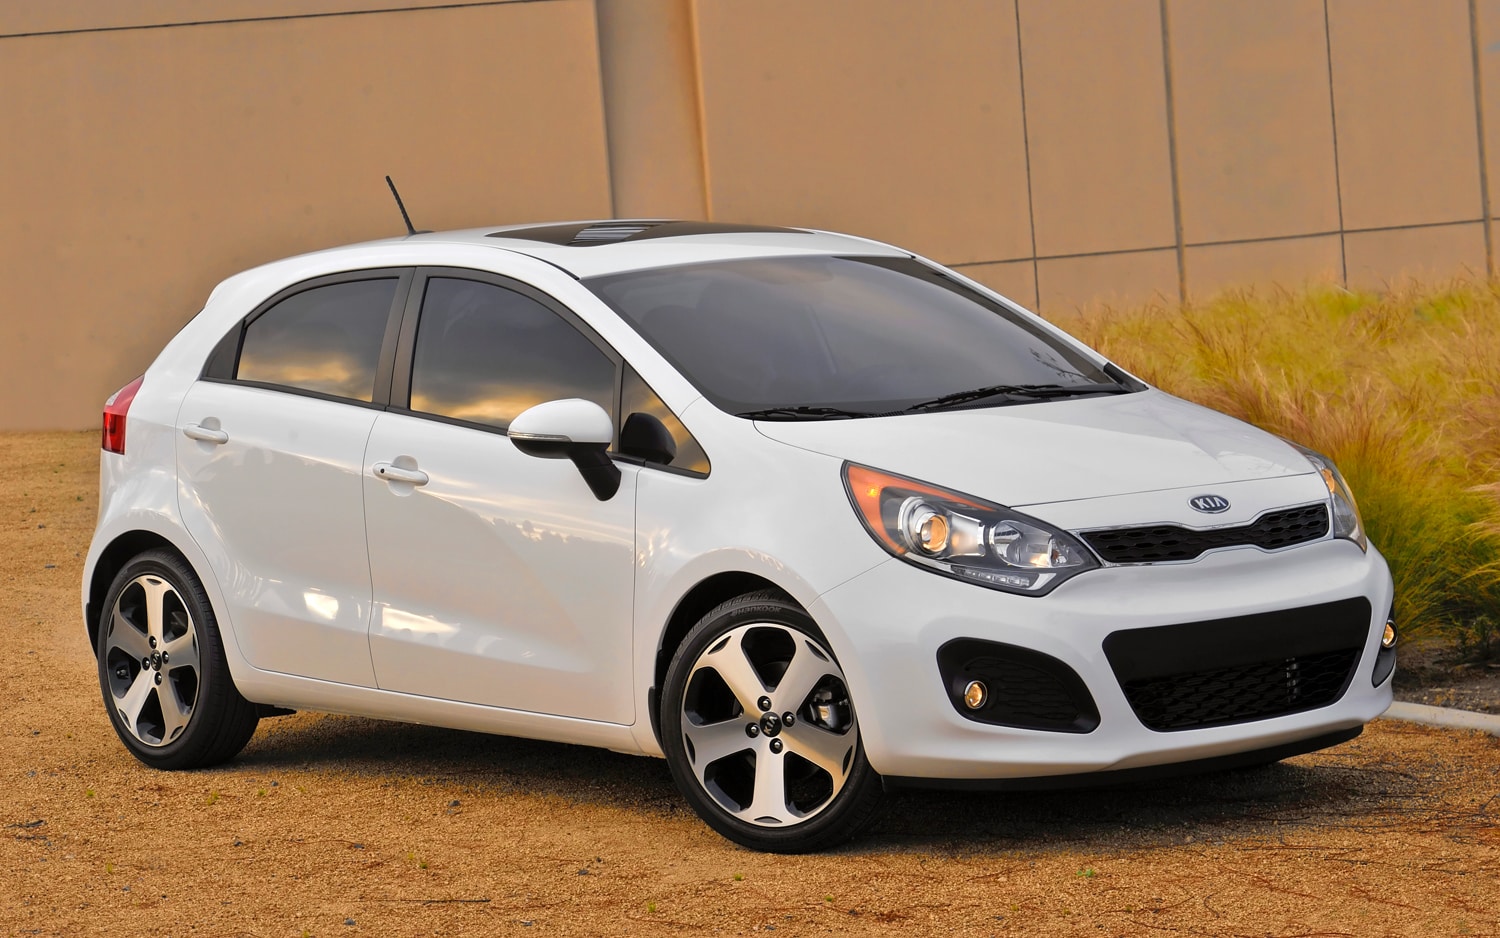 2012 Kia Rio Hatchback Priced from $14,350